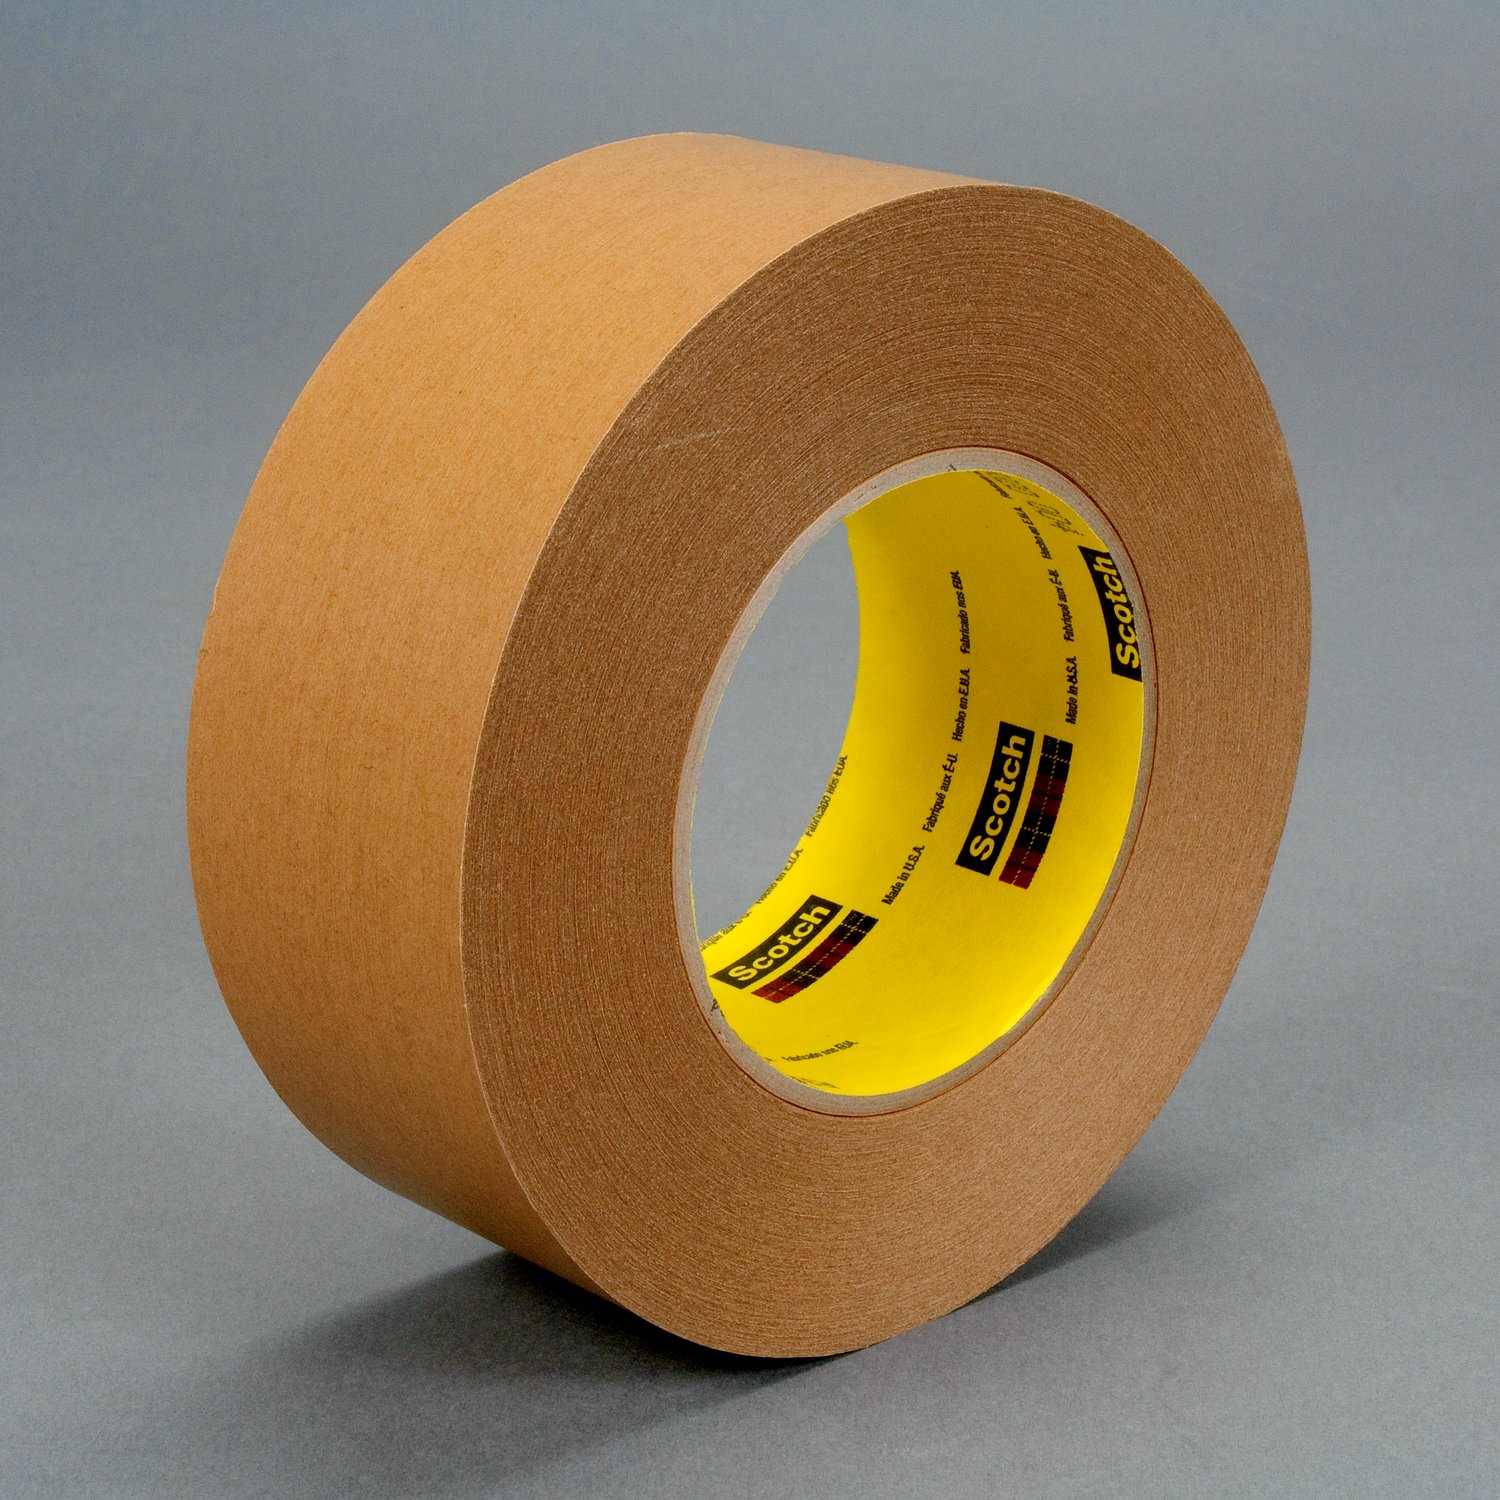 7100028041 - 3M Repulpable Strong Single Coated Tape R3187, Kraft, 72 mm x 55 m, 7.5
mil, 12 rolls per case